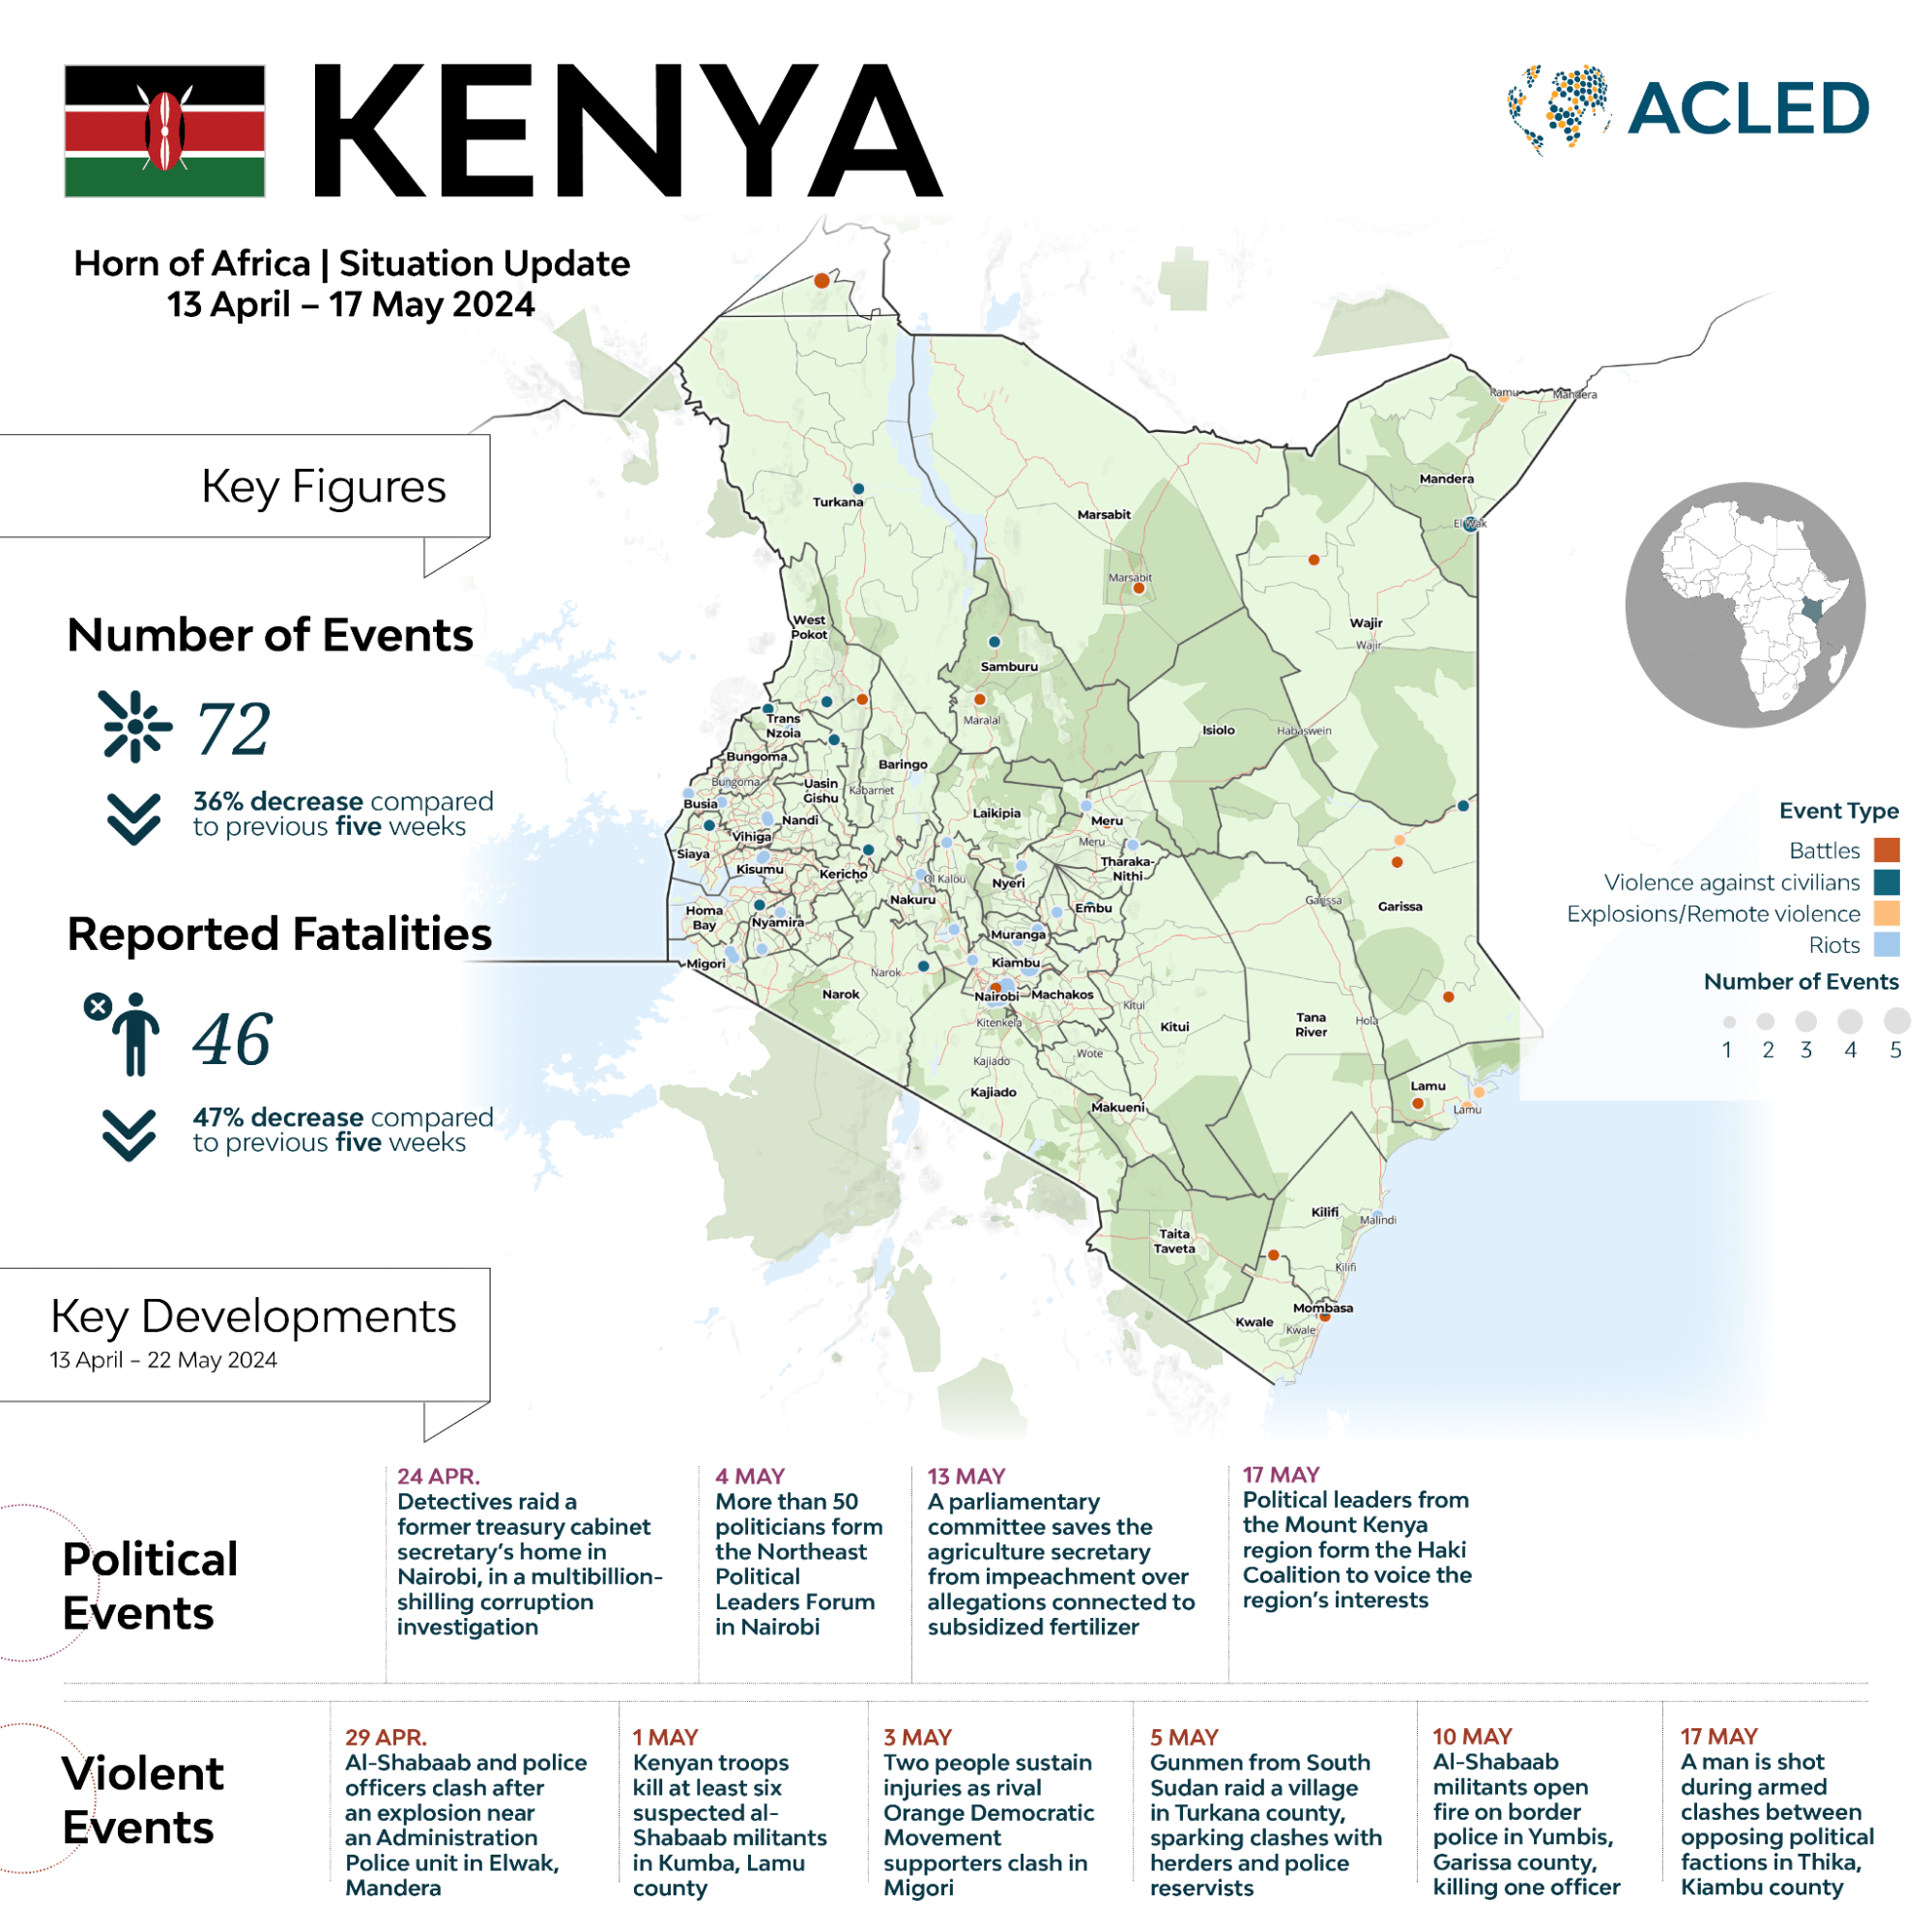 Infographic - Horn of Africa - Kenya situation update 13 April - 17 May 2024